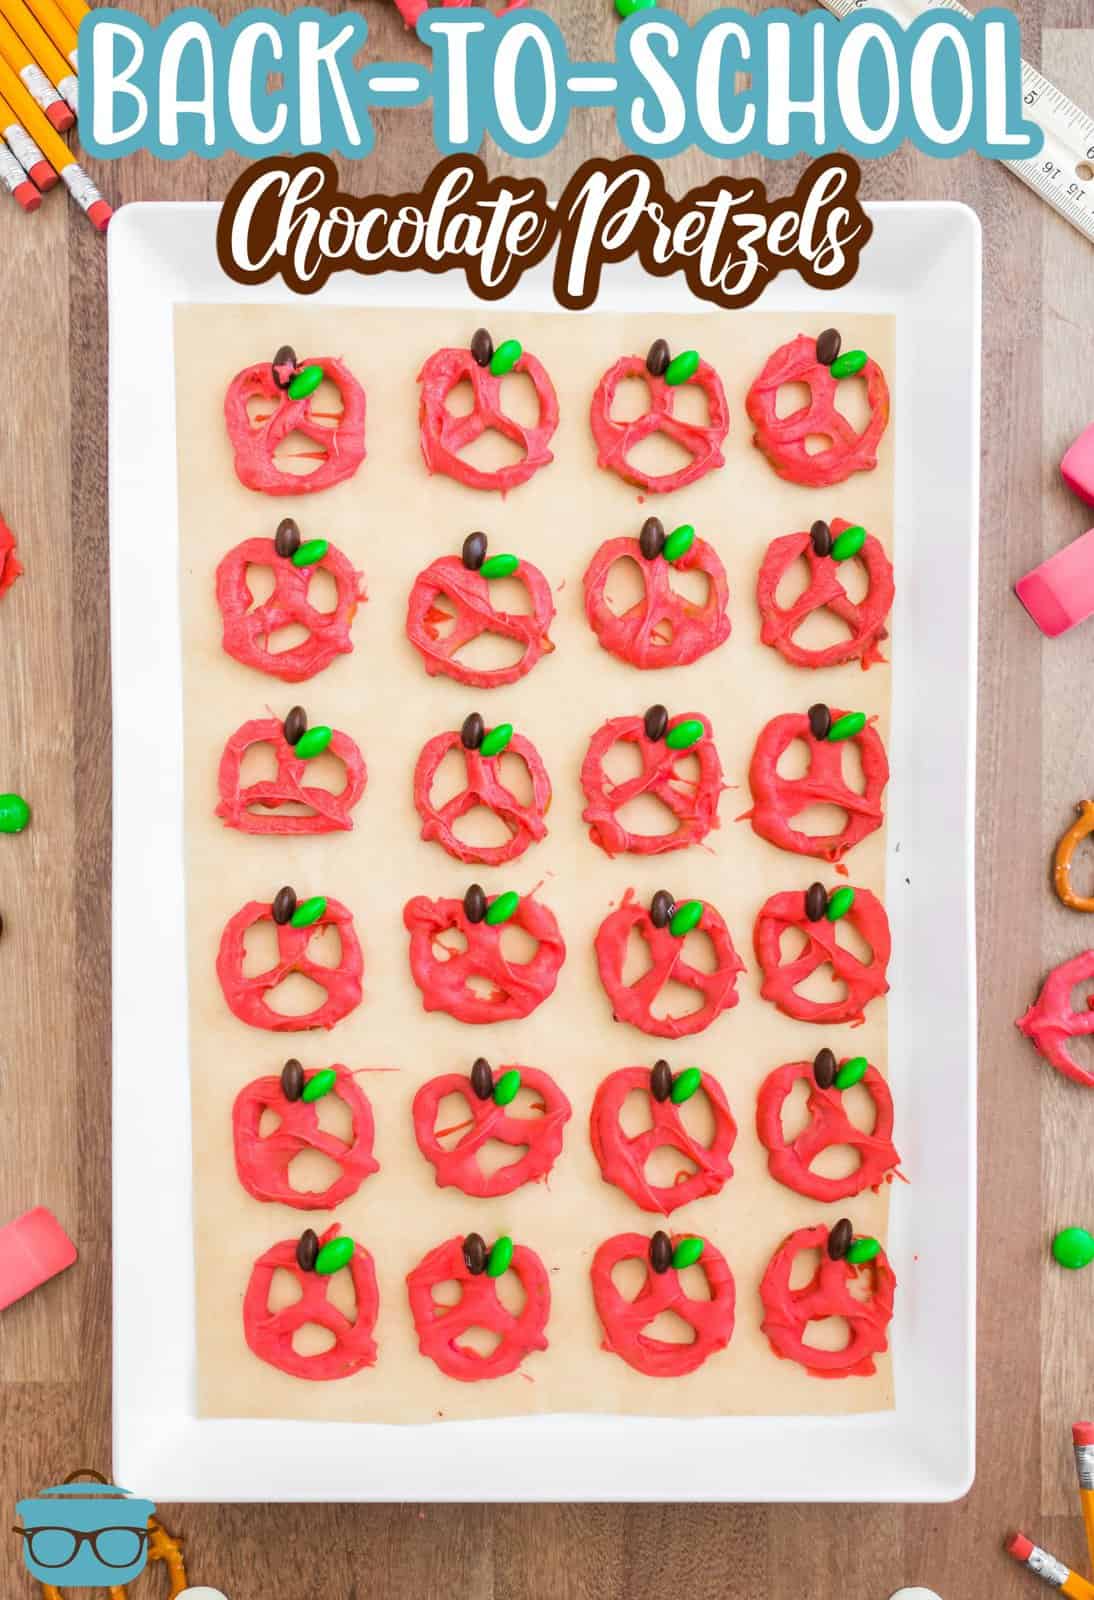 Pinterest image of Back-to-School Chocolate Covered Pretzels on white tray overhead.